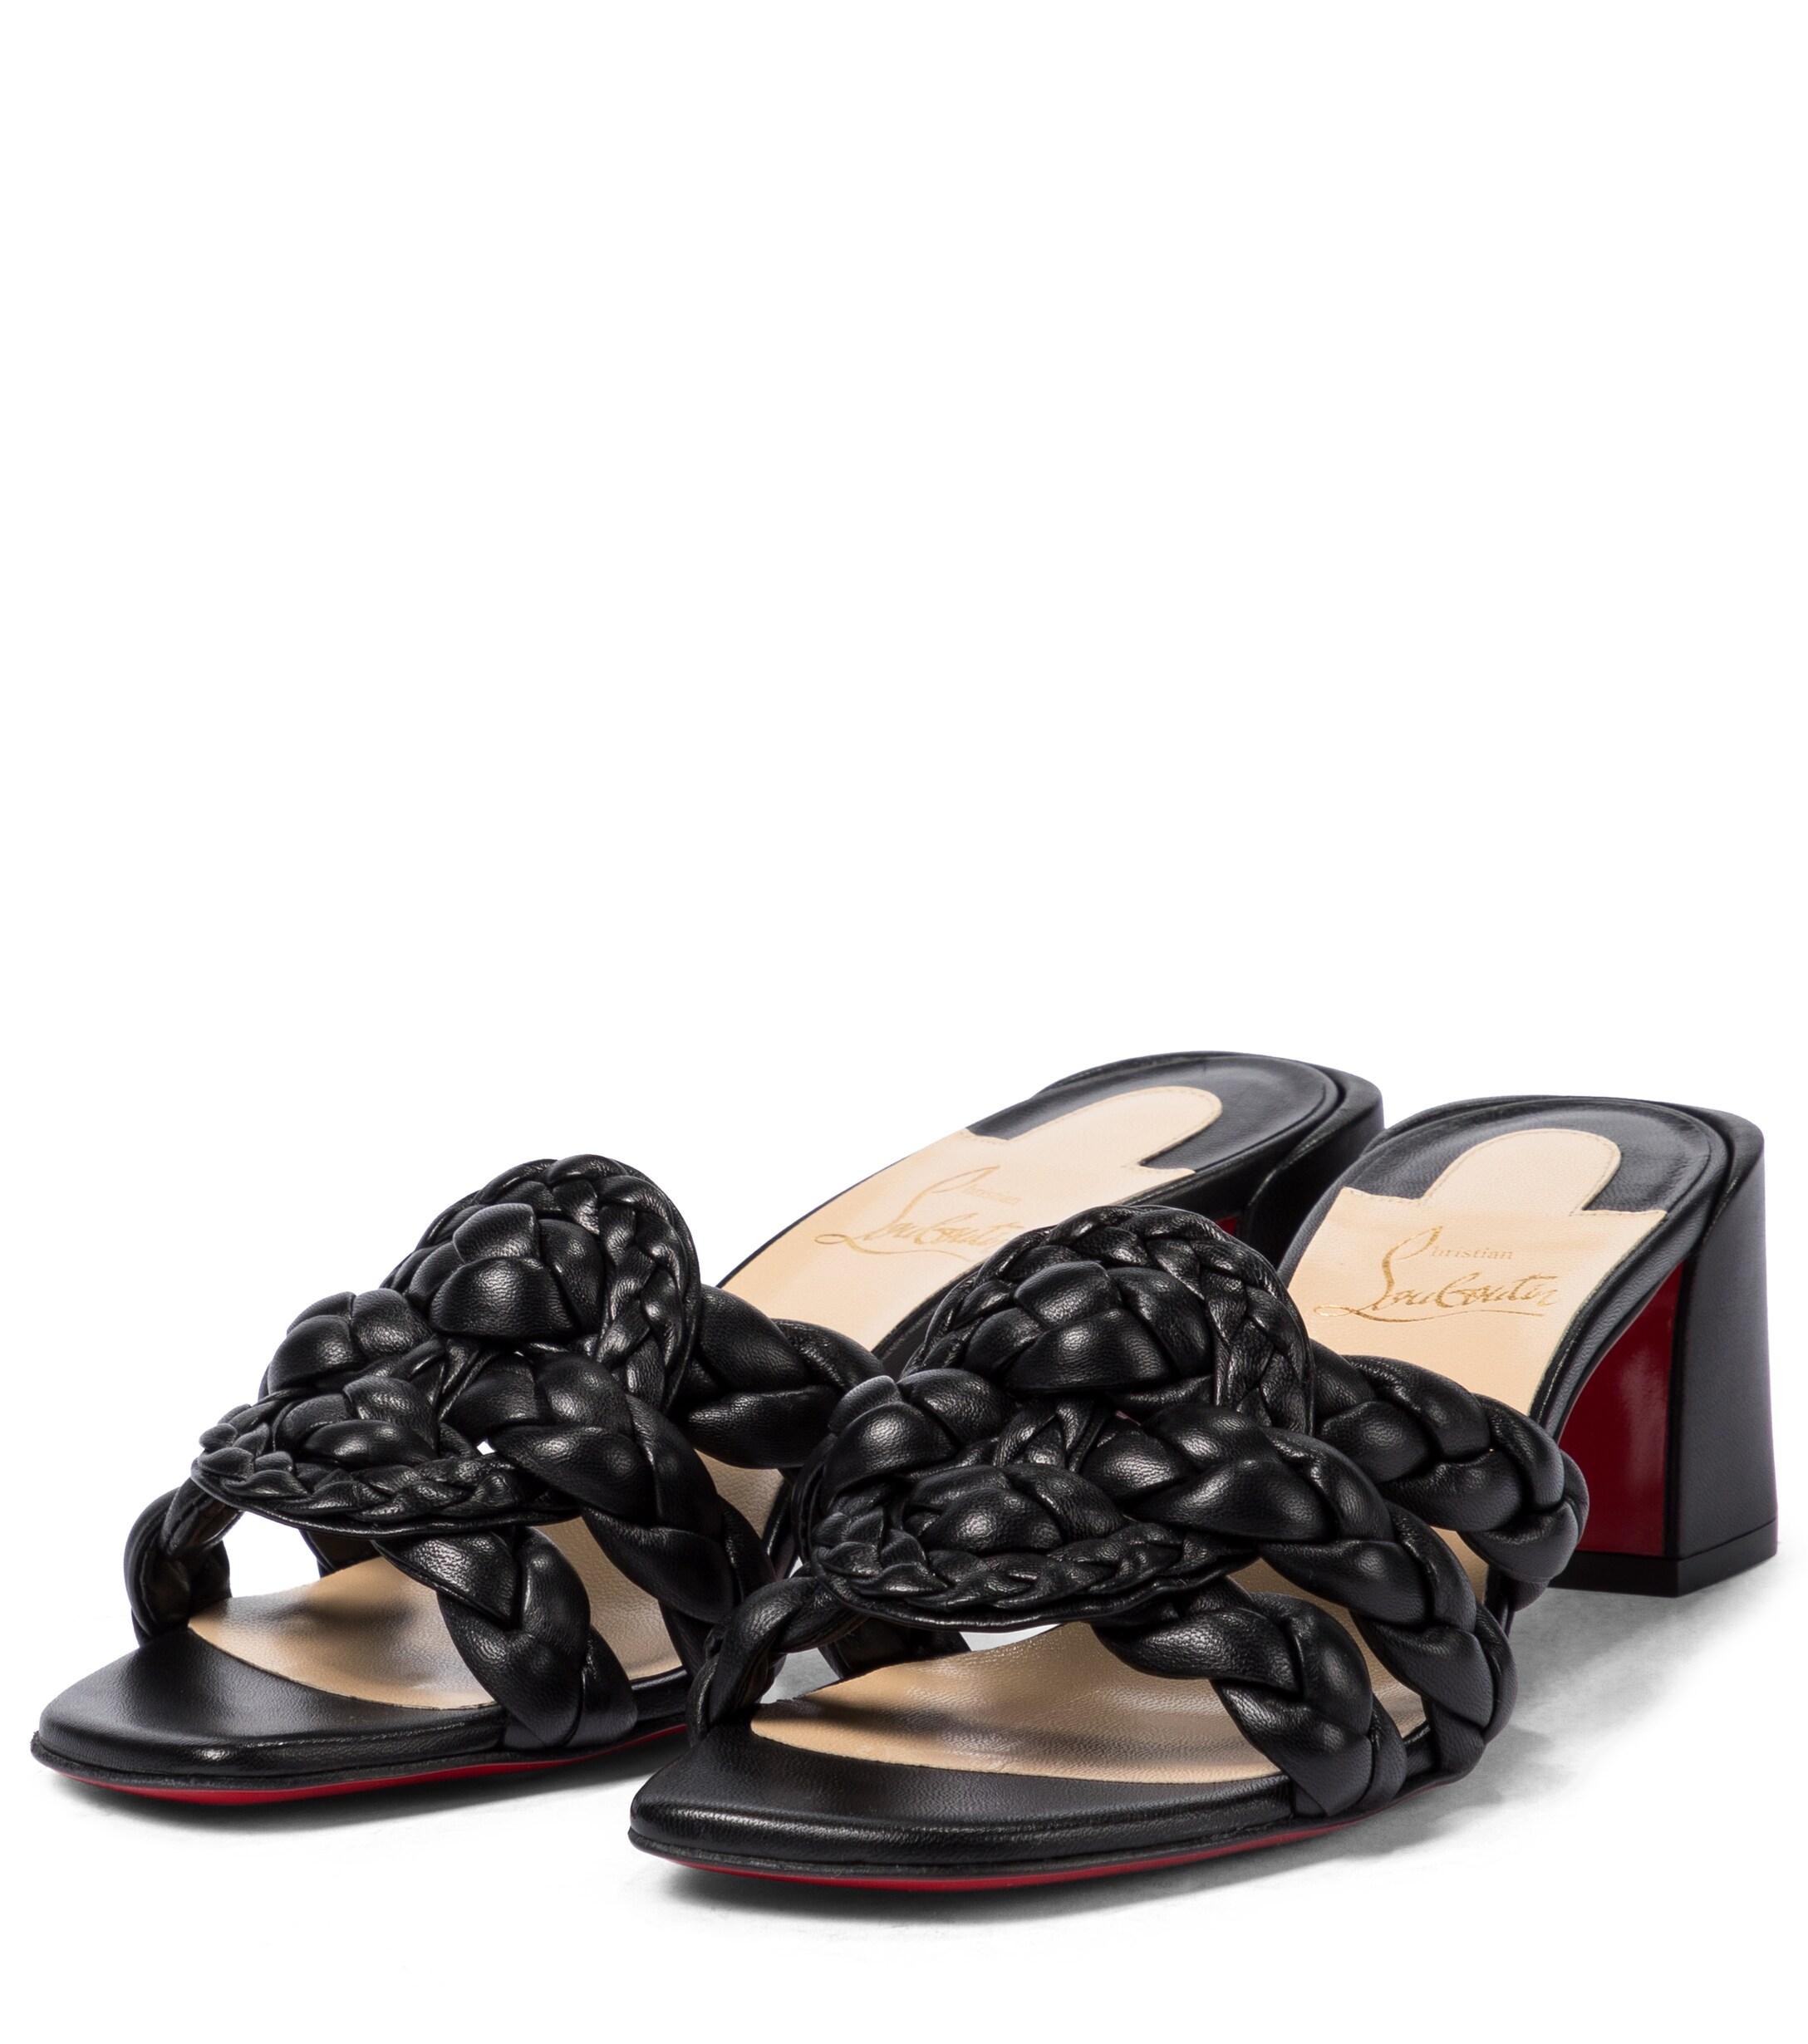 Christian Louboutin ELLA Braided Leather Suede Strappy Flat Sandals Shoes  $695